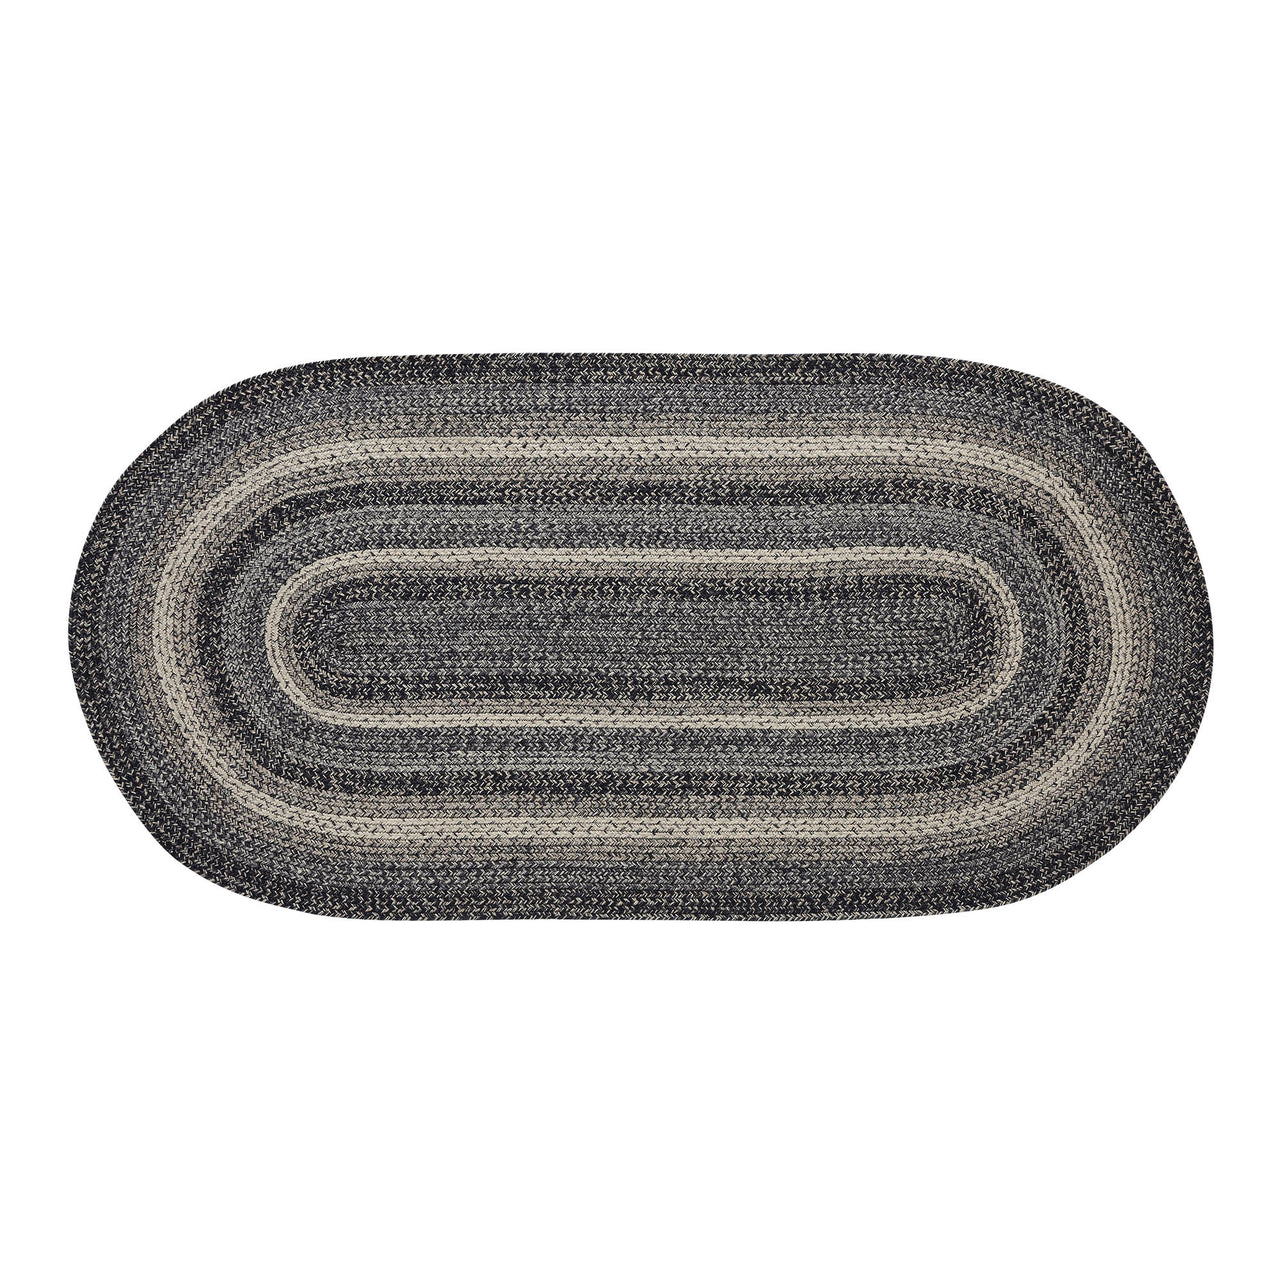 Sawyer Mill Black White Jute Braided Oval Rug with Rug Pad 3x6' VHC Brands